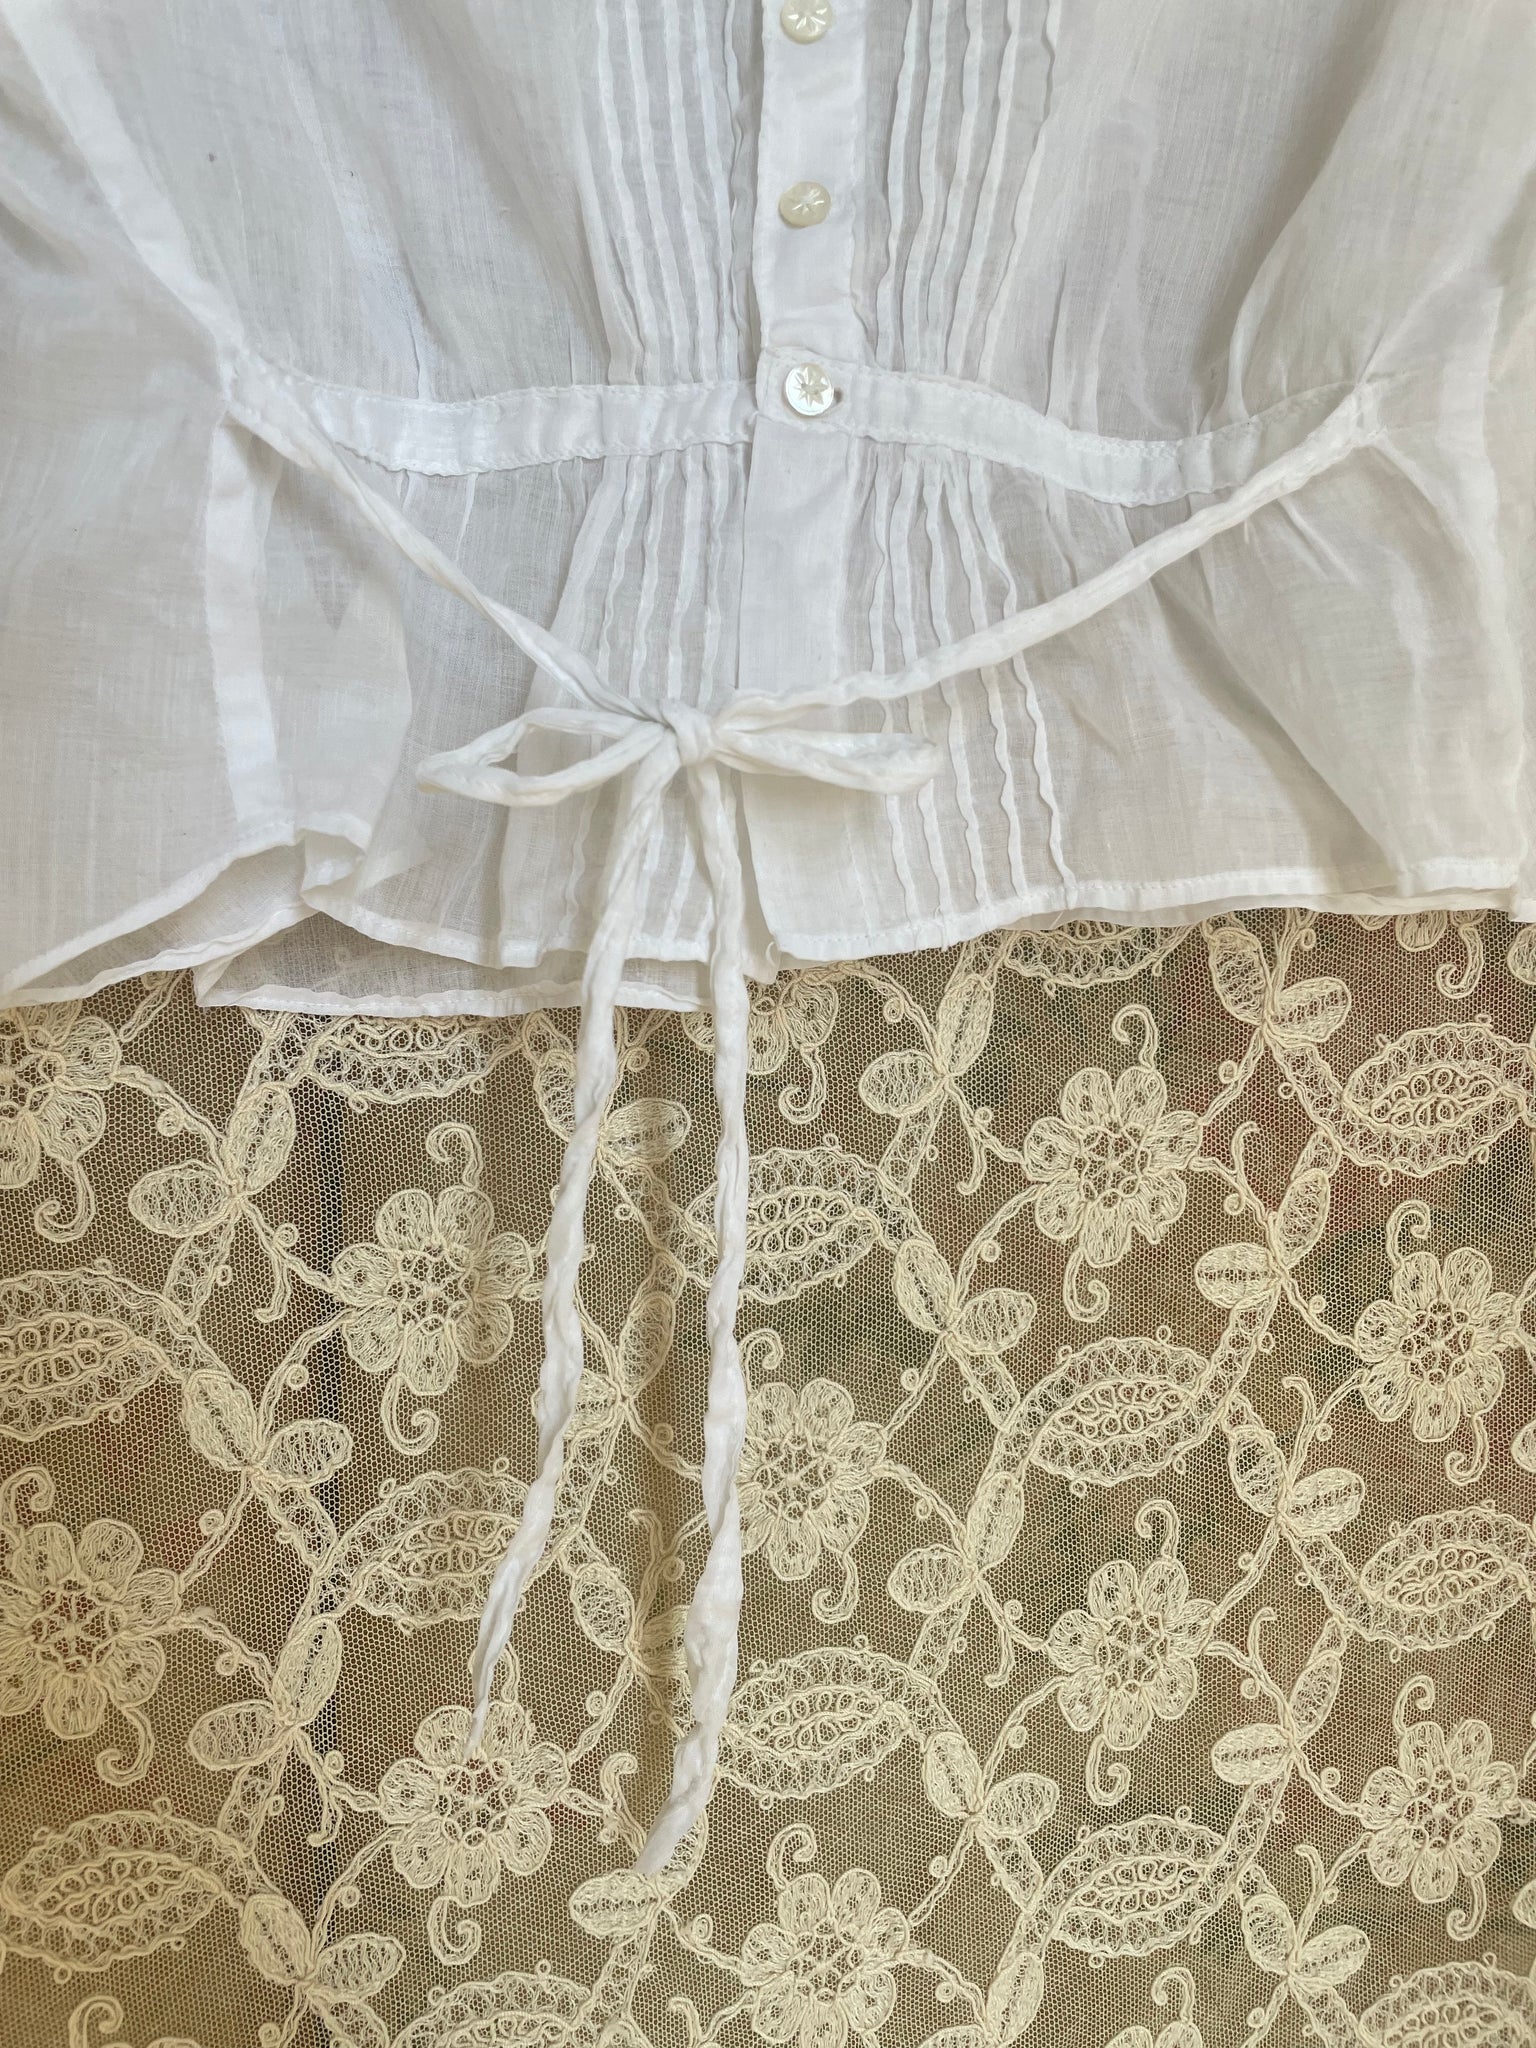 1900s Edwardian White Cotton Blouse Rose Crochet Collar Embroidery Mother of Pearl